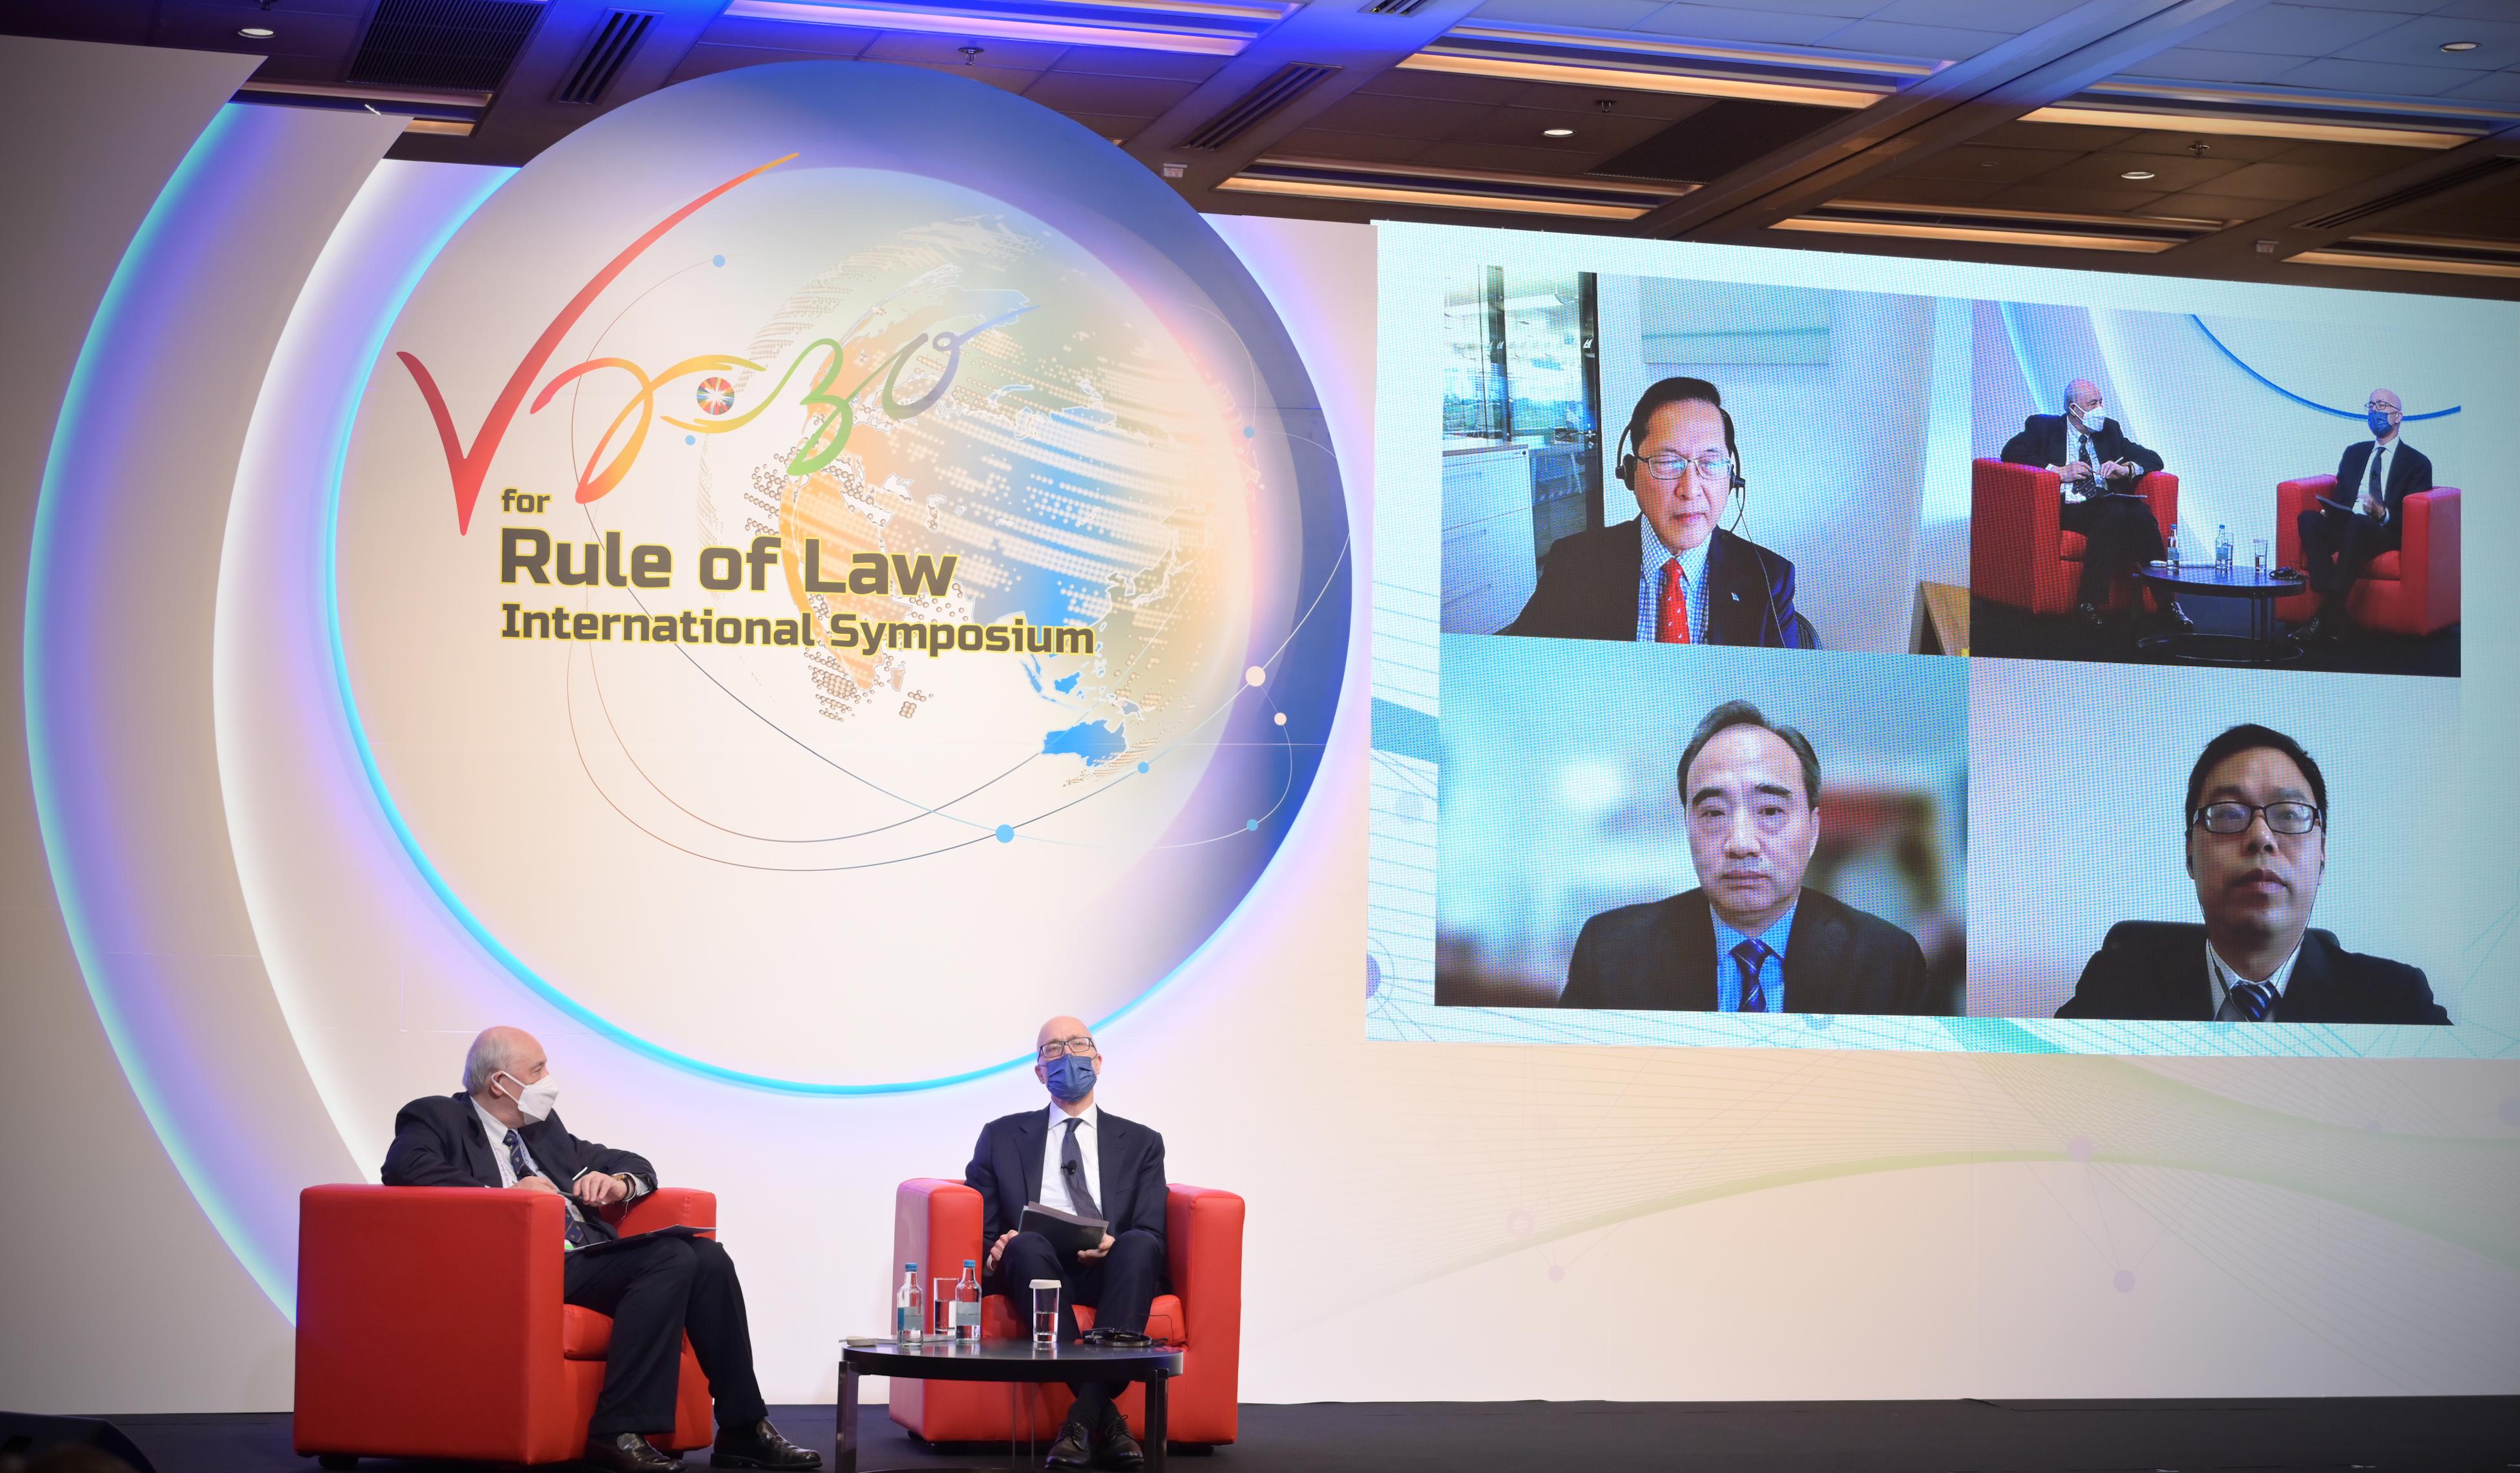 The Vision 2030 for Rule of Law International Symposium, co-organised by the Department of Justice, the Asian Peace and Reconciliation Council and the Asian Academy of International Law, was held today (May 26) in a hybrid format. Photo shows eminent speakers from varied fields at Panel Session 1 on rule of law under international law.